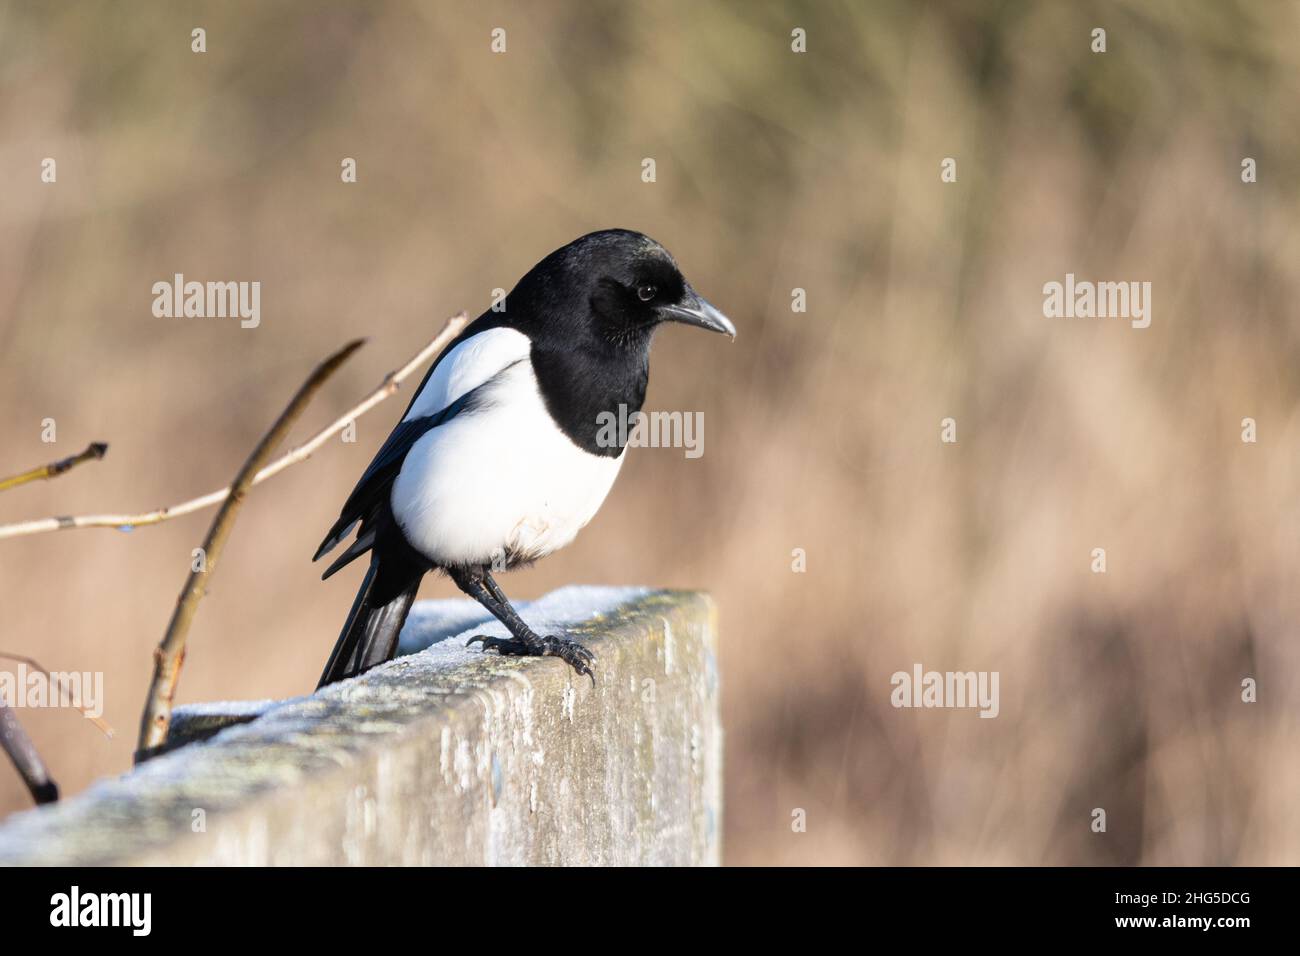 Magpie (Pica pica), black and white bird in the corvidae family, perched on a bridge in winter, UK Stock Photo